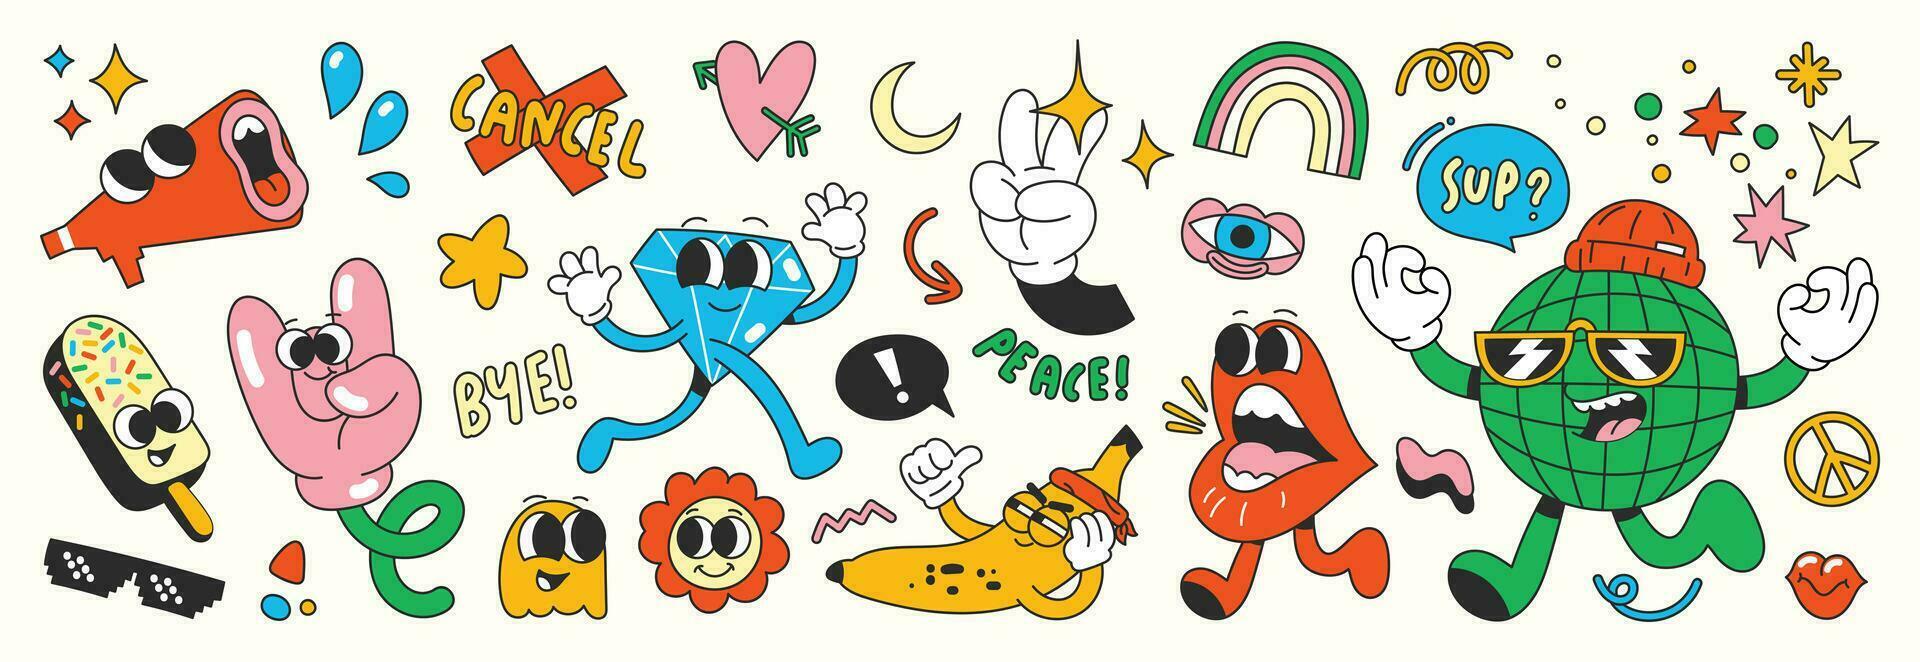 Set of 70s groovy element vector. Collection of cartoon characters, doodle smile face, heart, diamond, megaphone, hand, rainbow, star, word. Cute retro groovy hippie design for decorative, sticker. vector